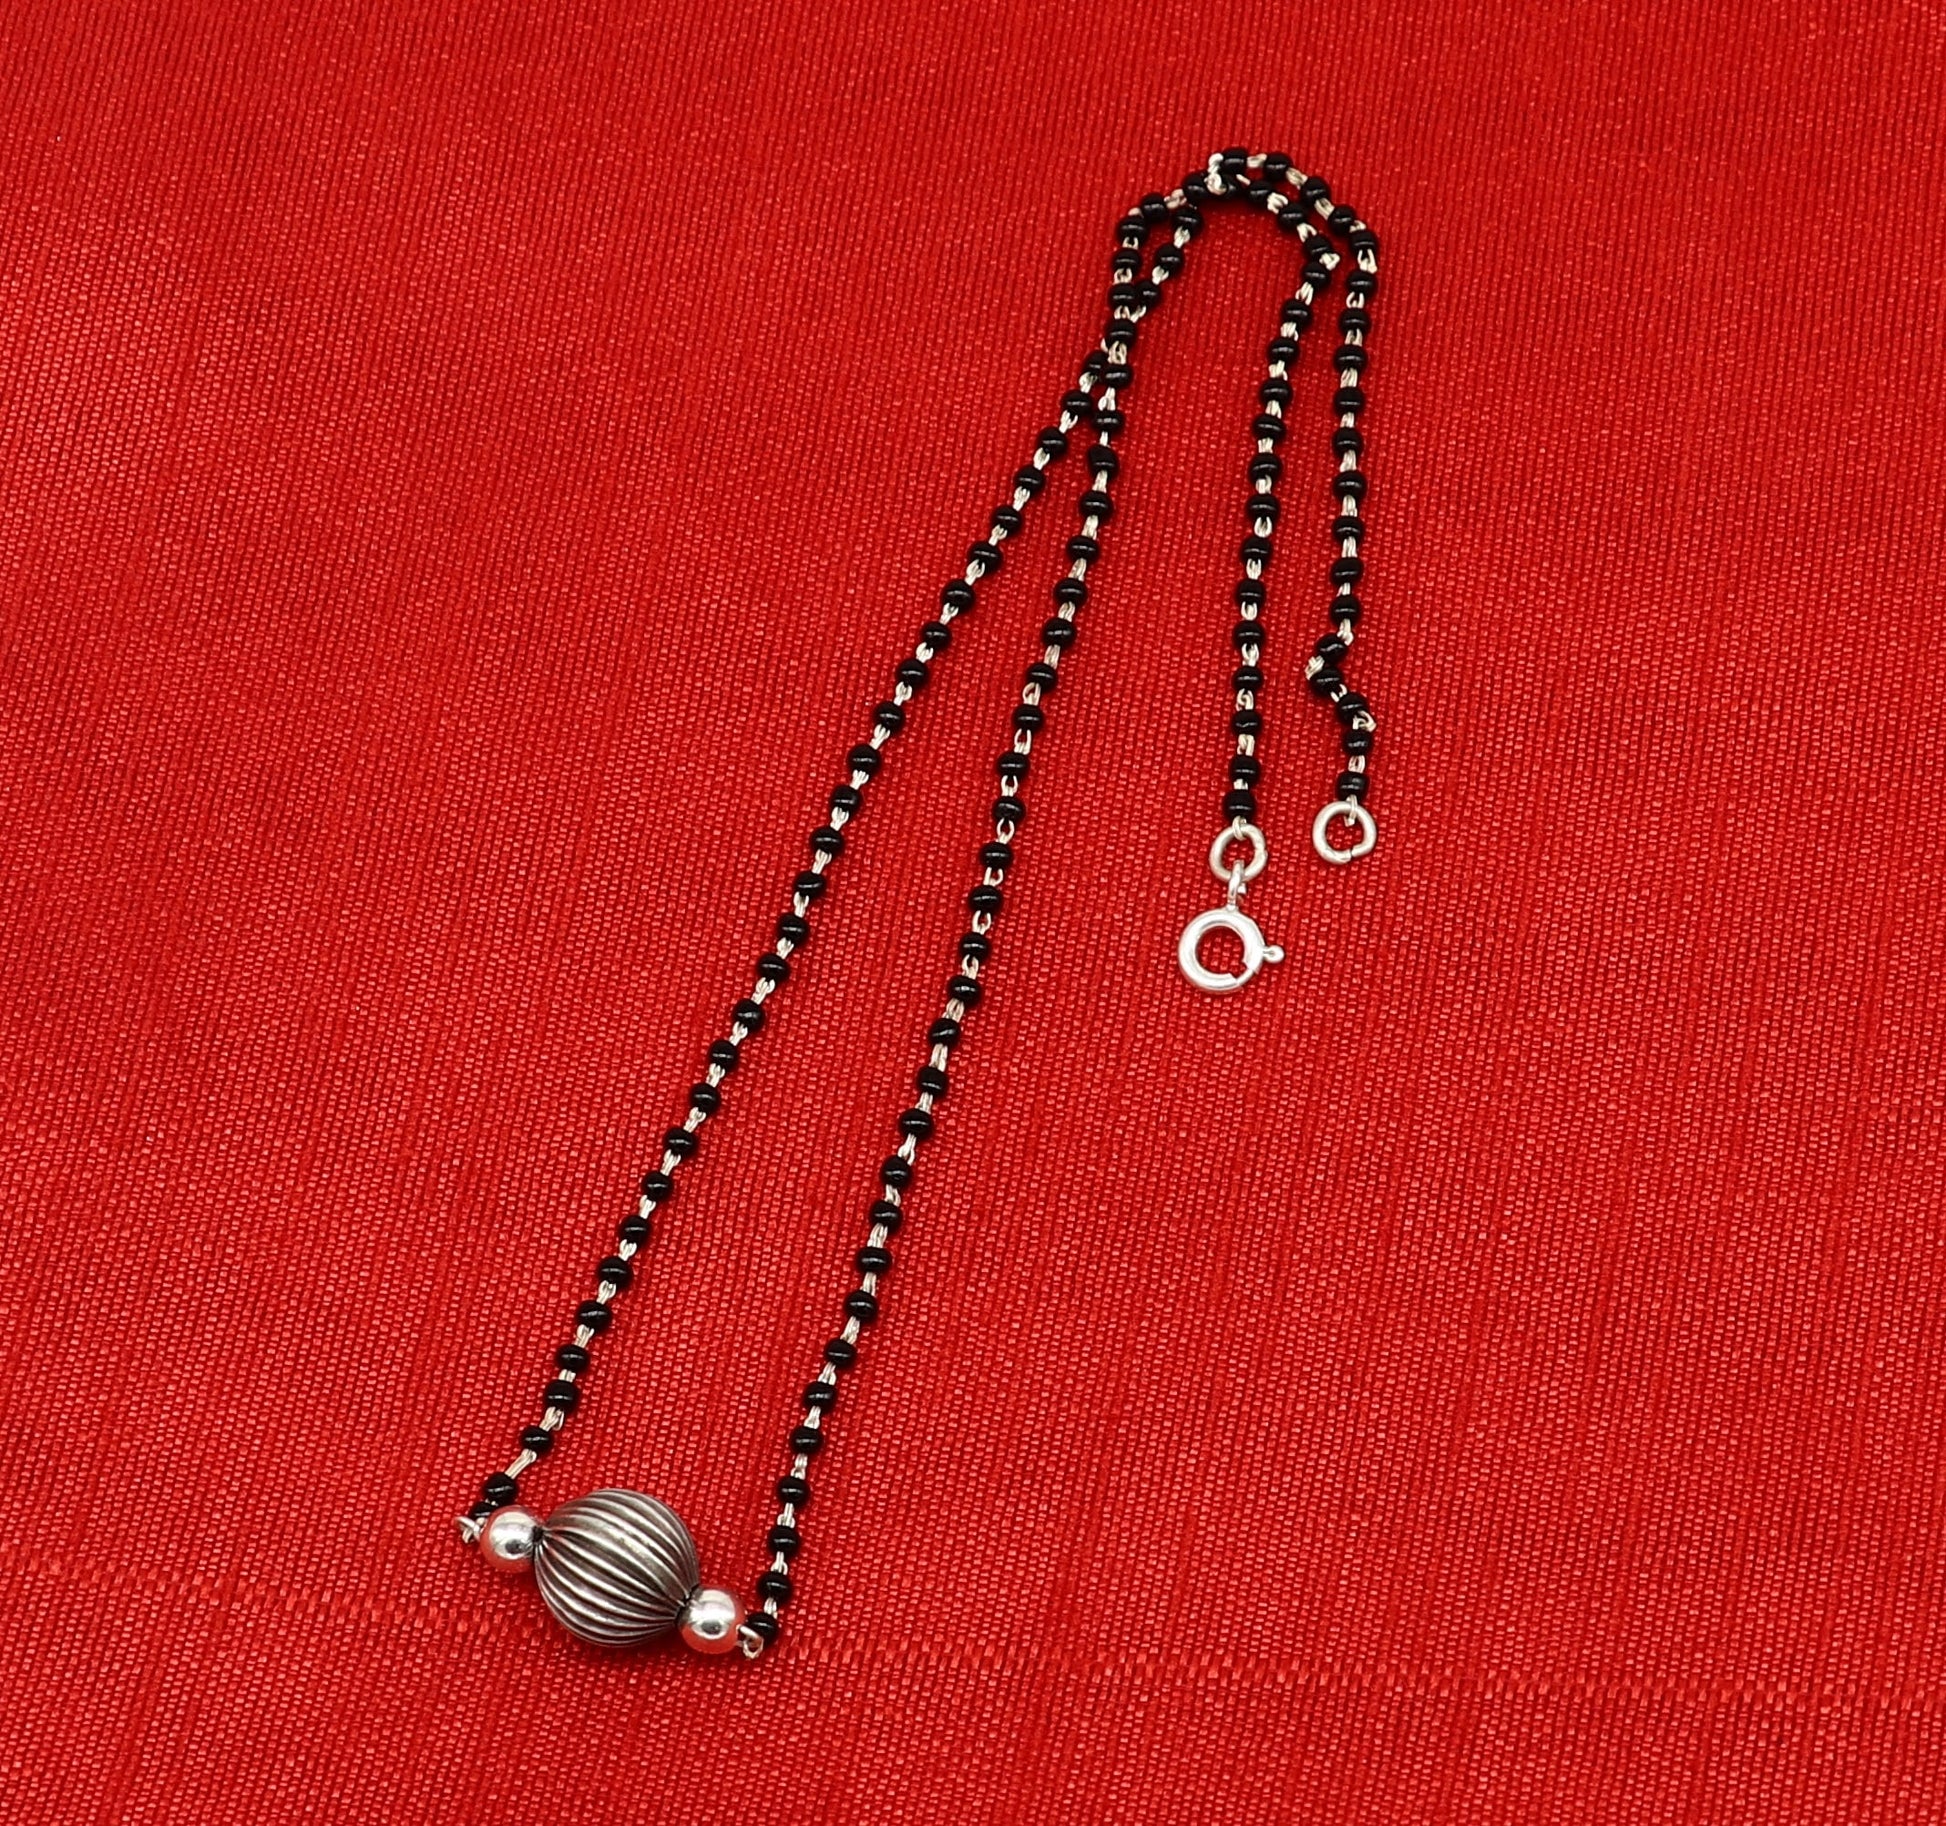 Pure 925 sterling silver black beads chain necklace, vintage ball pendant, traditional style brides Mangalsutra necklace set215 - TRIBAL ORNAMENTS